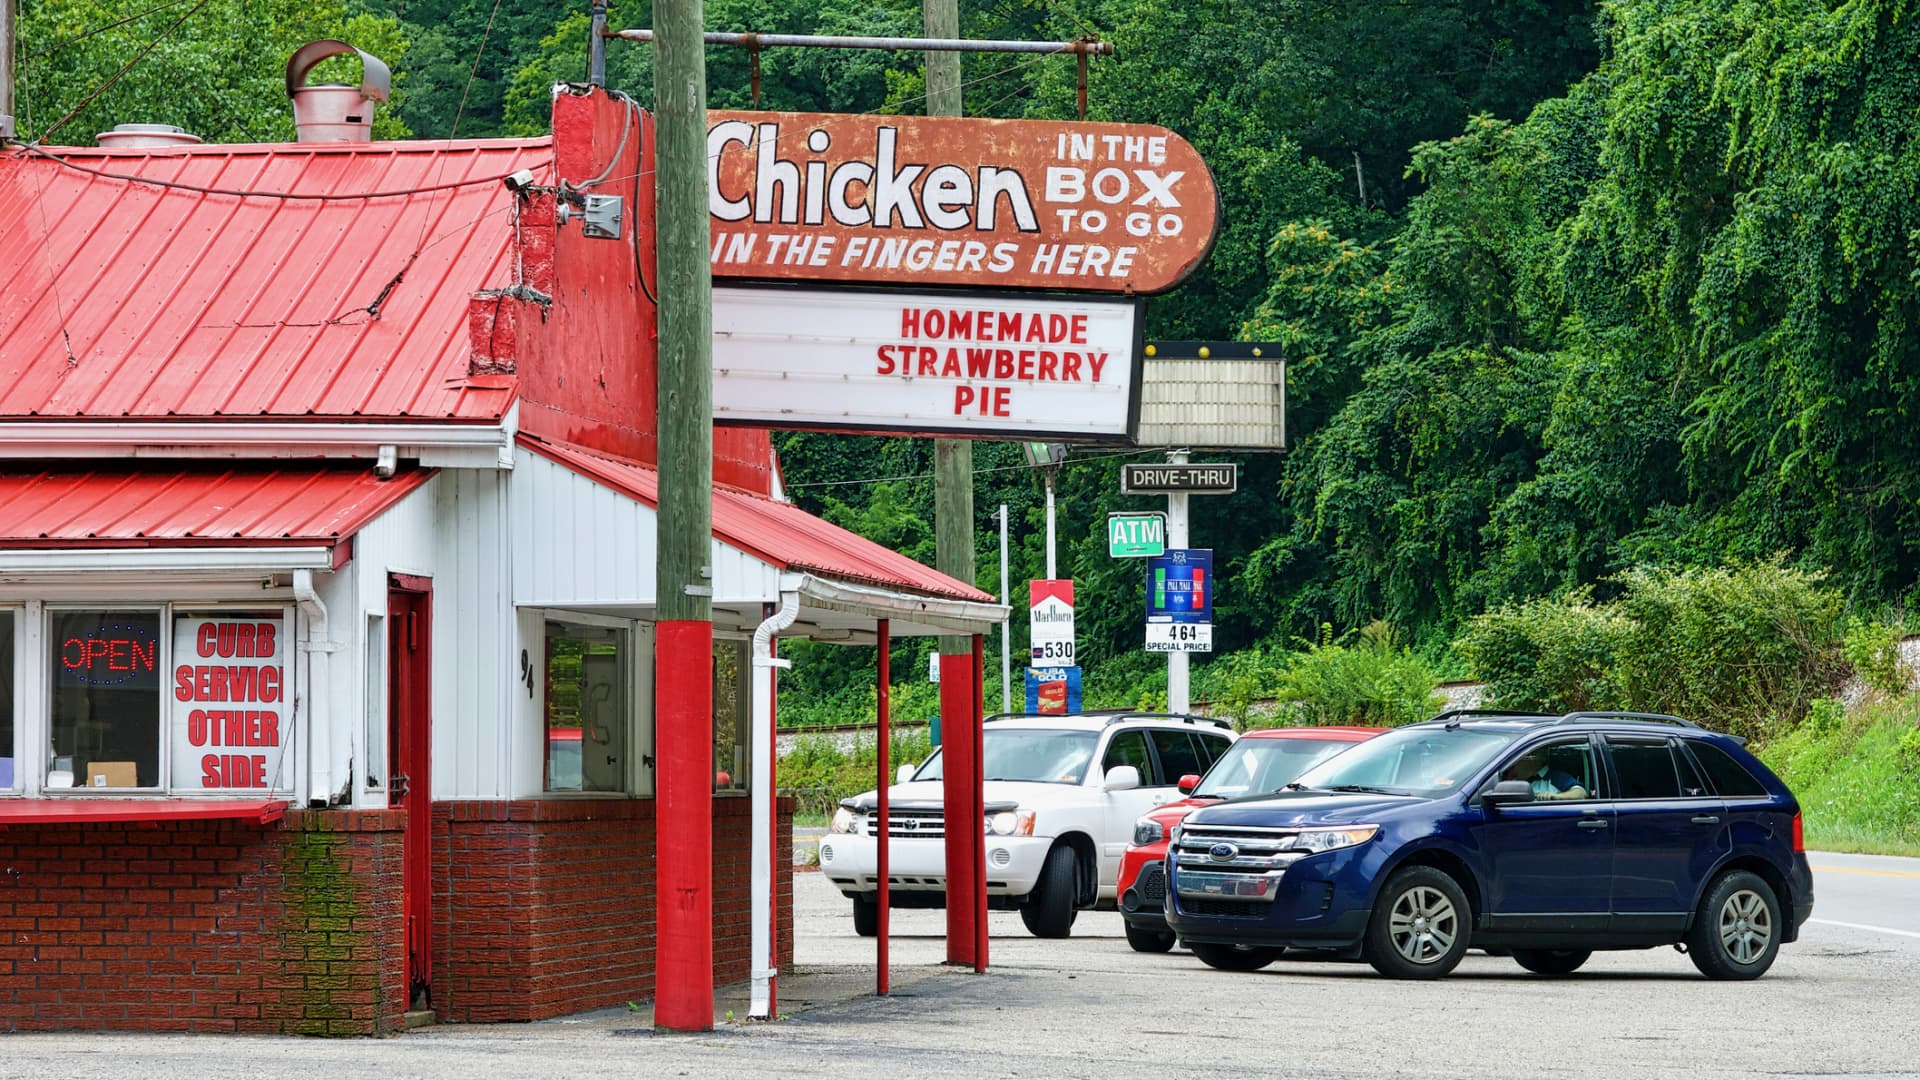 Morrison's Drive Inn is a well-known landmark in Logan County and has offered its dining customers curb side food service for nearly 70-years since it opened a few years after World War II ended.